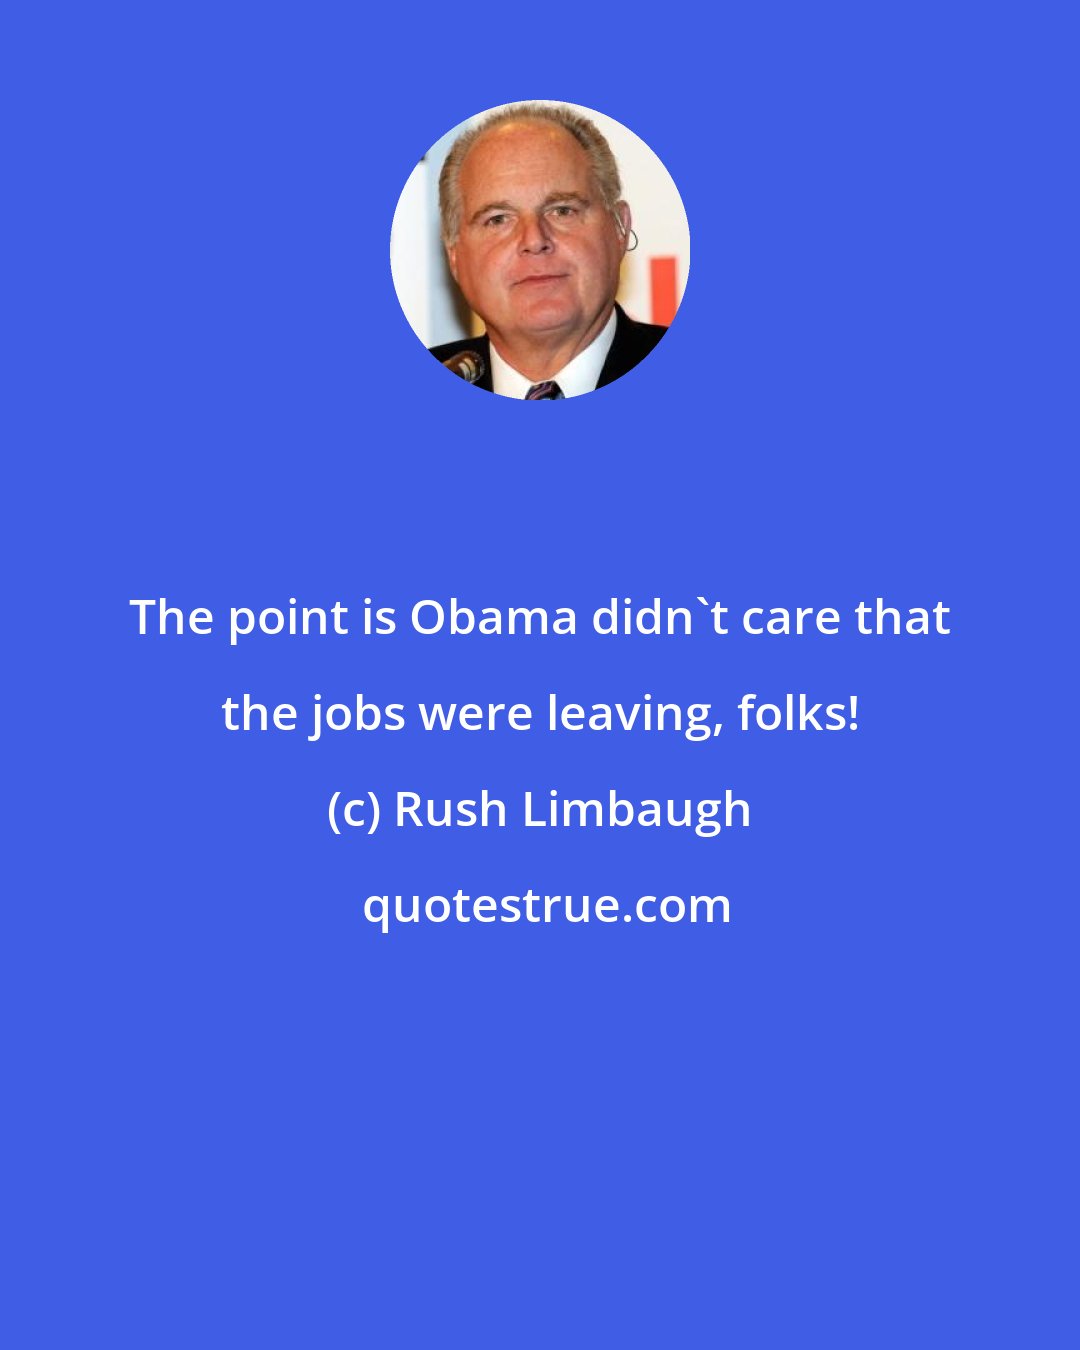 Rush Limbaugh: The point is Obama didn't care that the jobs were leaving, folks!